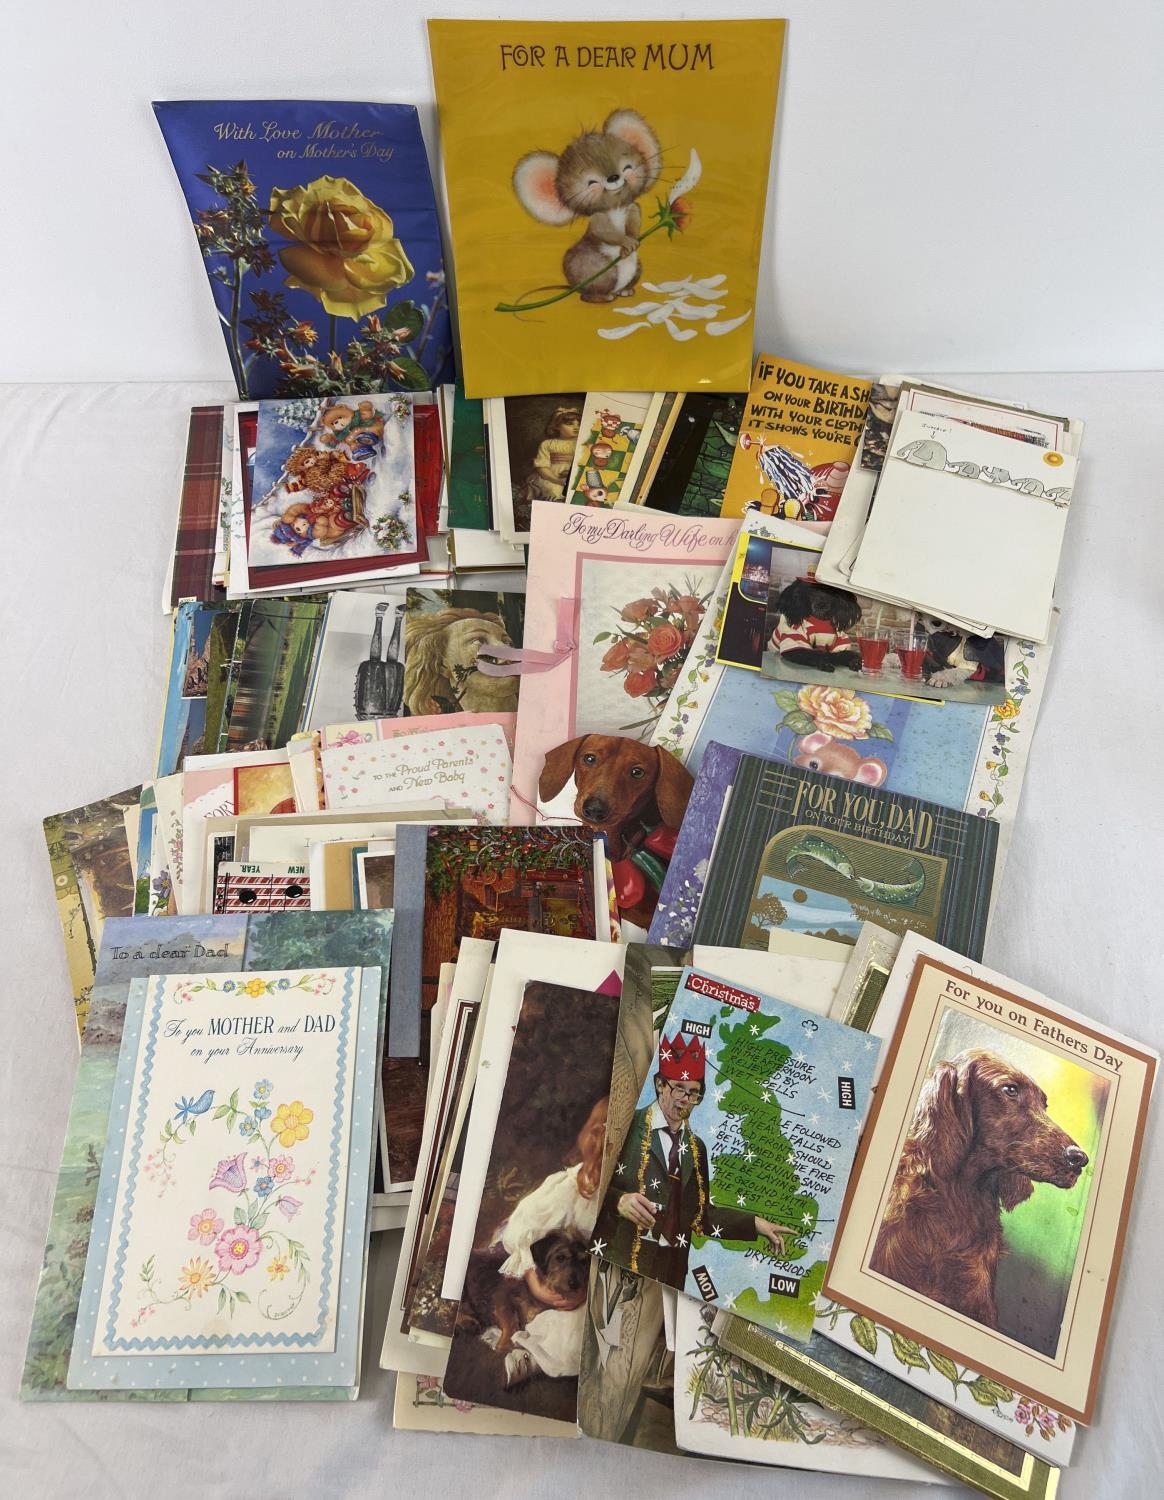 A box of assorted vintage & more modern postcards and greetings cards.